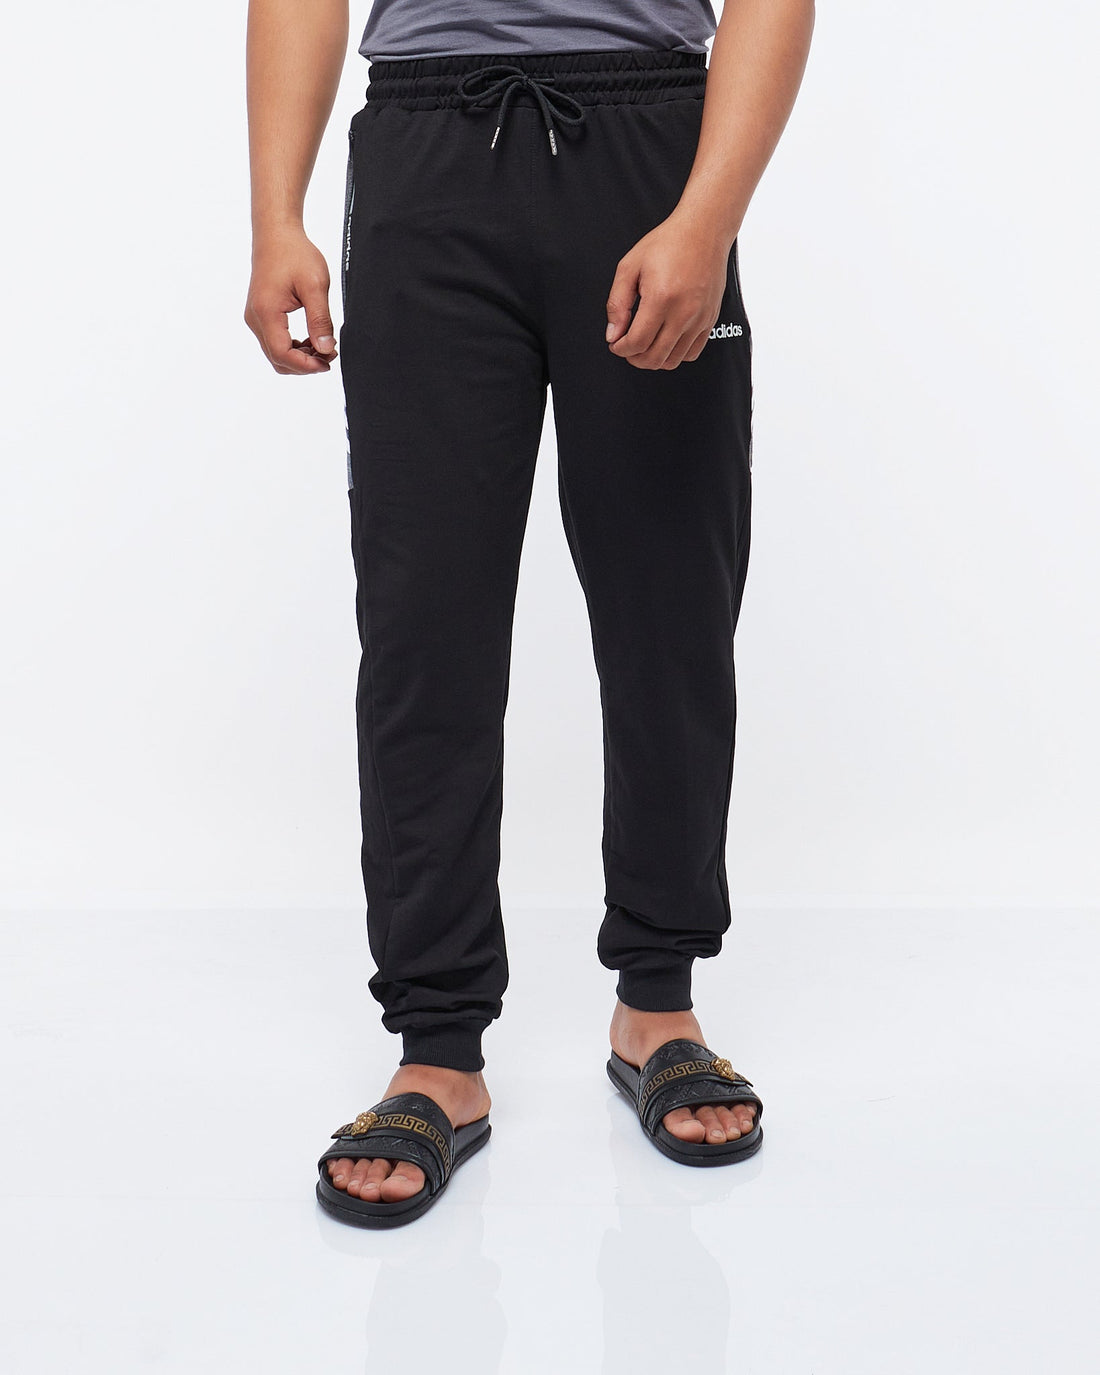 MOI OUTFIT-Side Striped Logo Printed Men Jogger 19.90